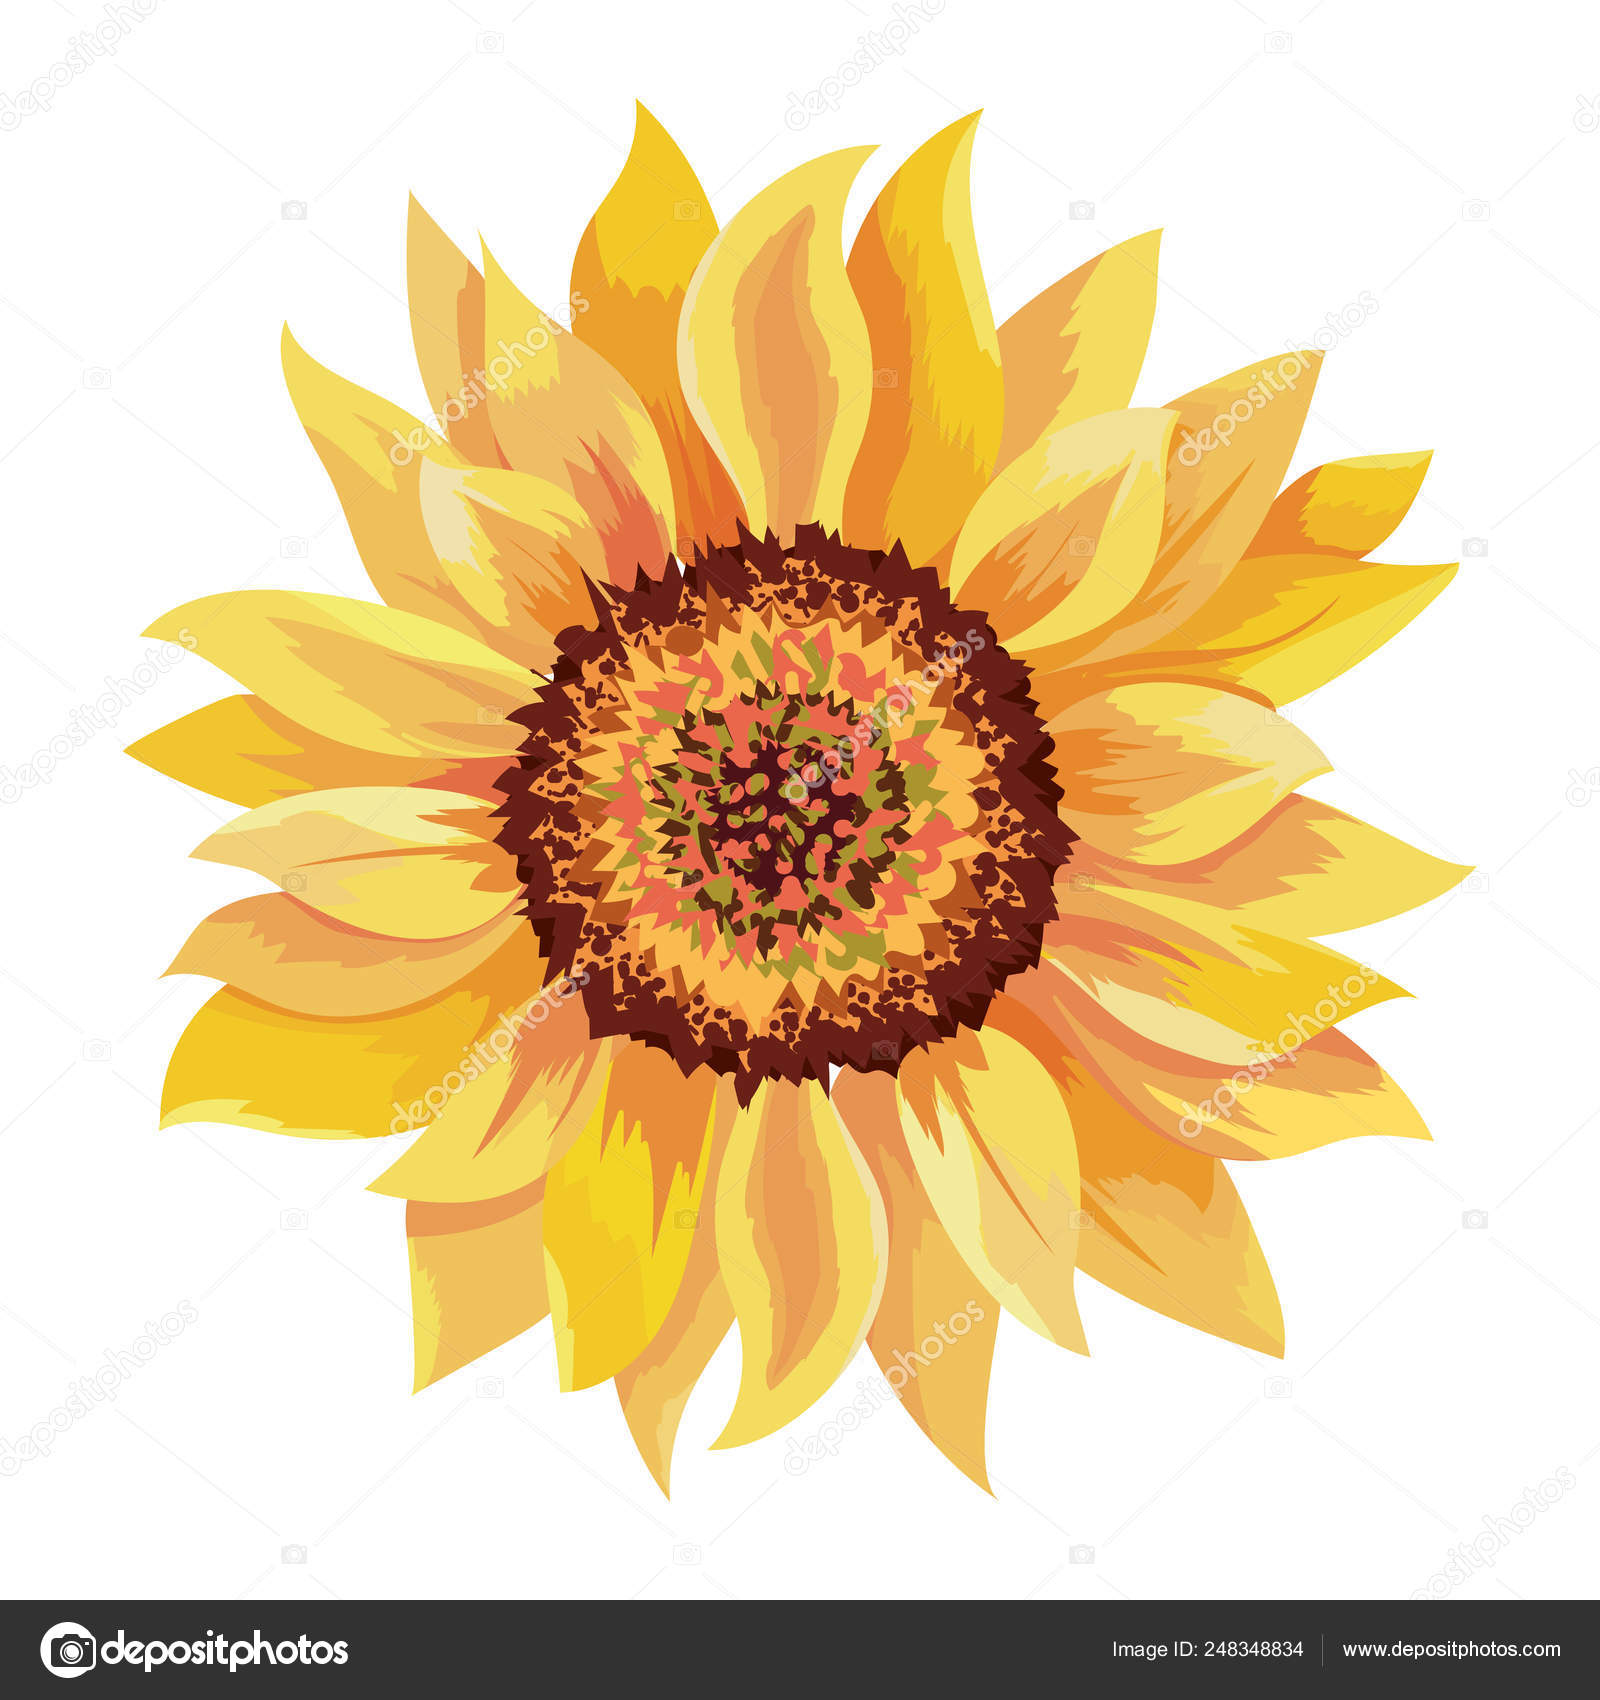 How to Draw a Sunflower Easy Step by Step Drawing Guides | Girasoles  dibujo, Arte del bosquejo, Dibujos